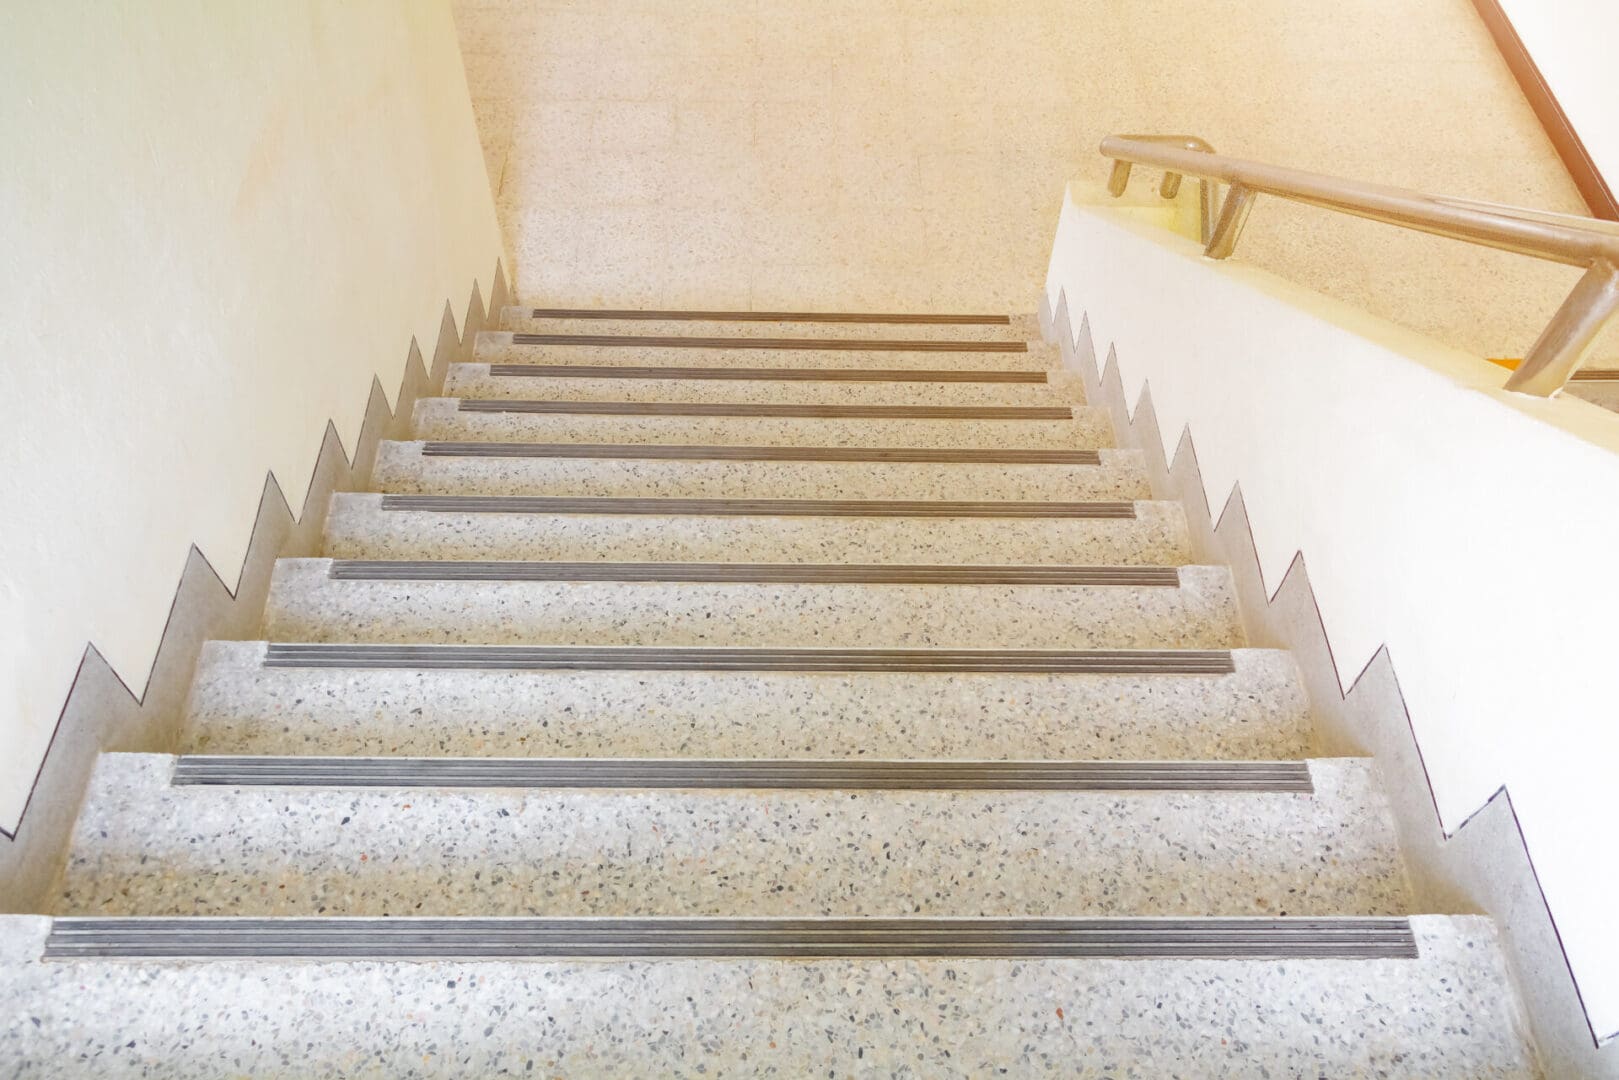 A staircase with white steps and a railing.